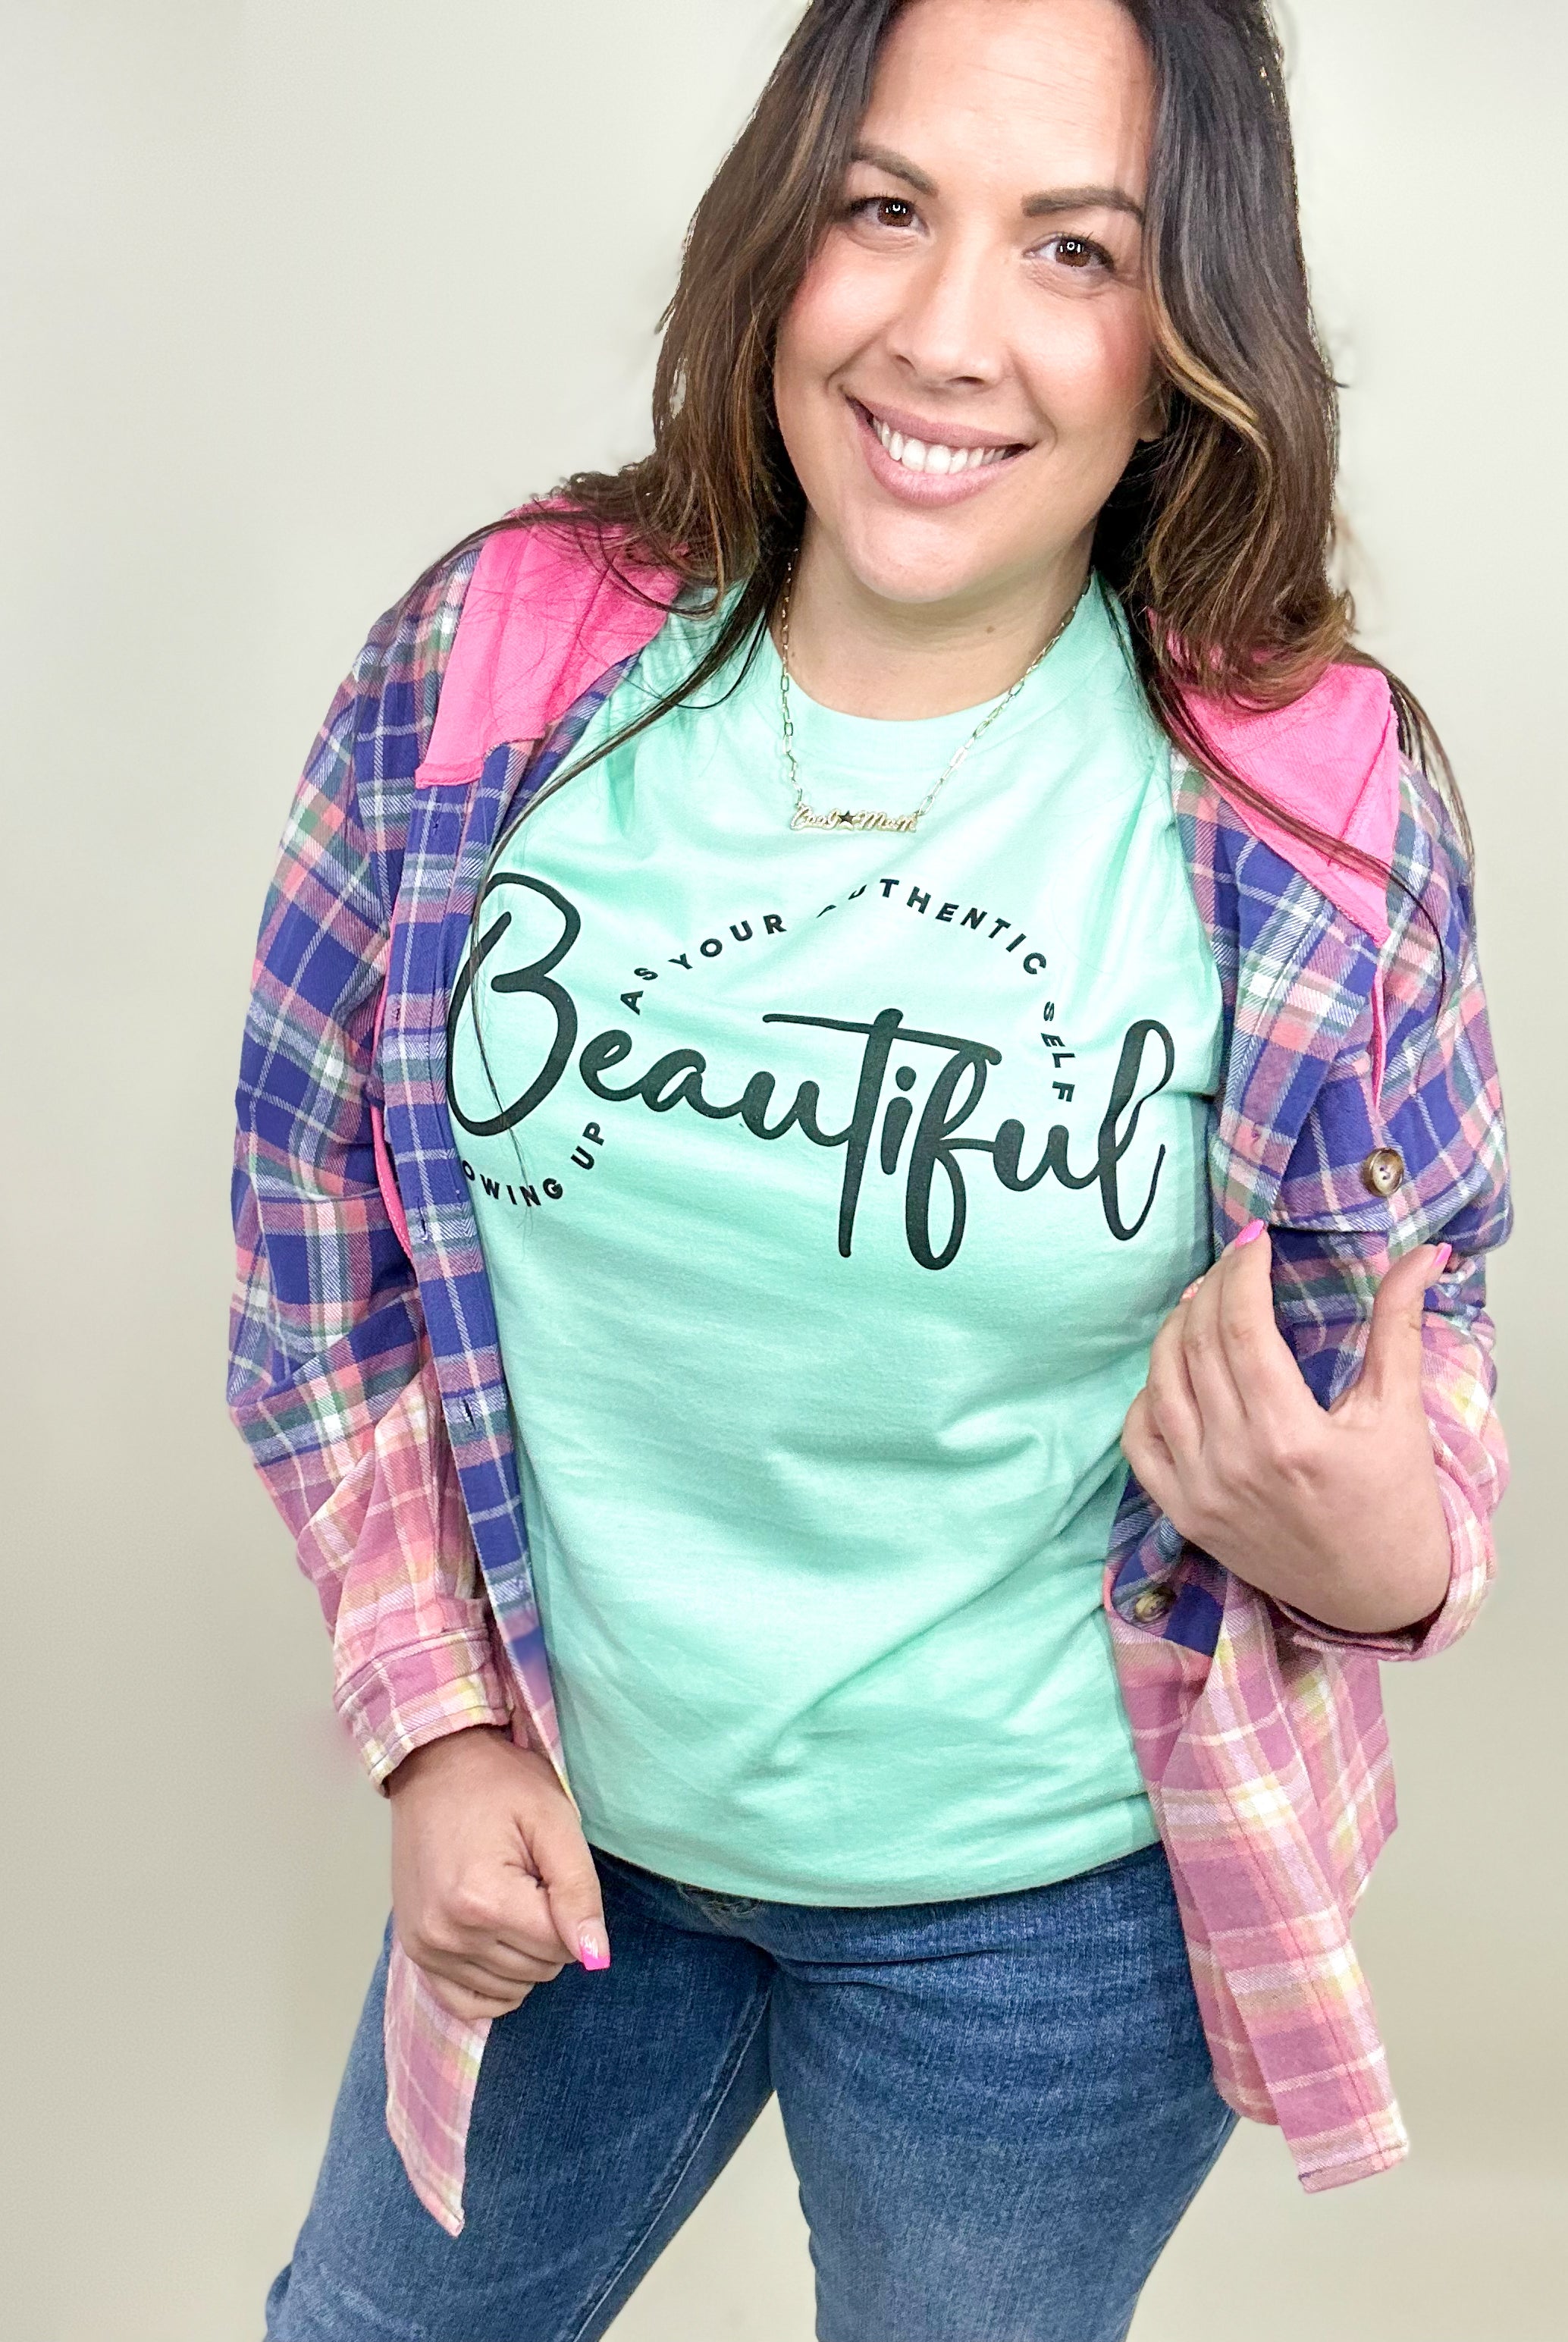 Beautiful Graphic Tee-110 Short Sleeve Top-Heathered Boho-Heathered Boho Boutique, Women's Fashion and Accessories in Palmetto, FL